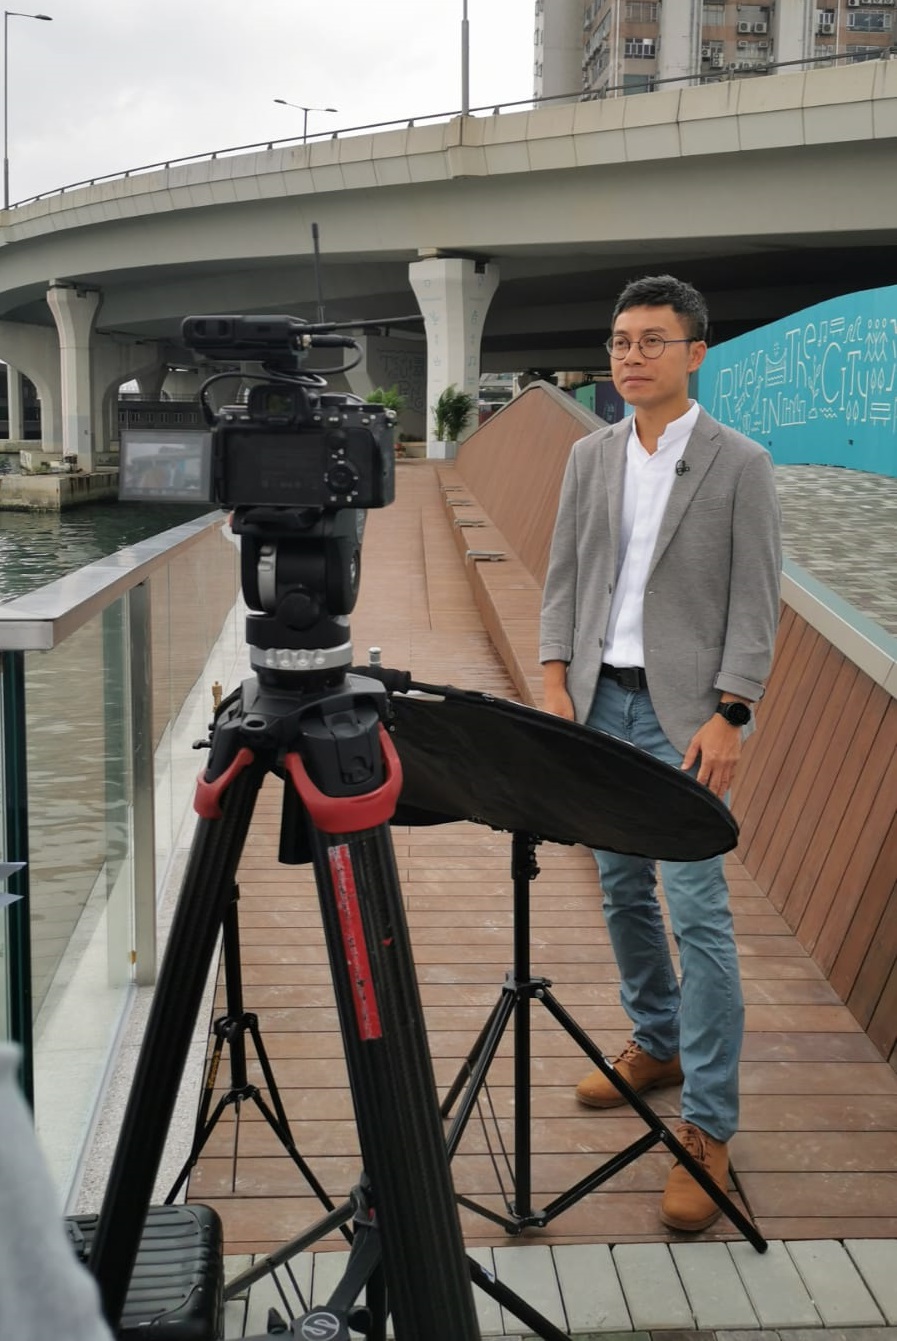 DSD Senior Engineer Mr Antony WAN Nam-fung shared that the project of Revitalization of Tsui Ping River incorporates more diverse elements to construct flood prevention facilities and promote connections between people. He expressed a great sense of fulfillment in being a part of this project